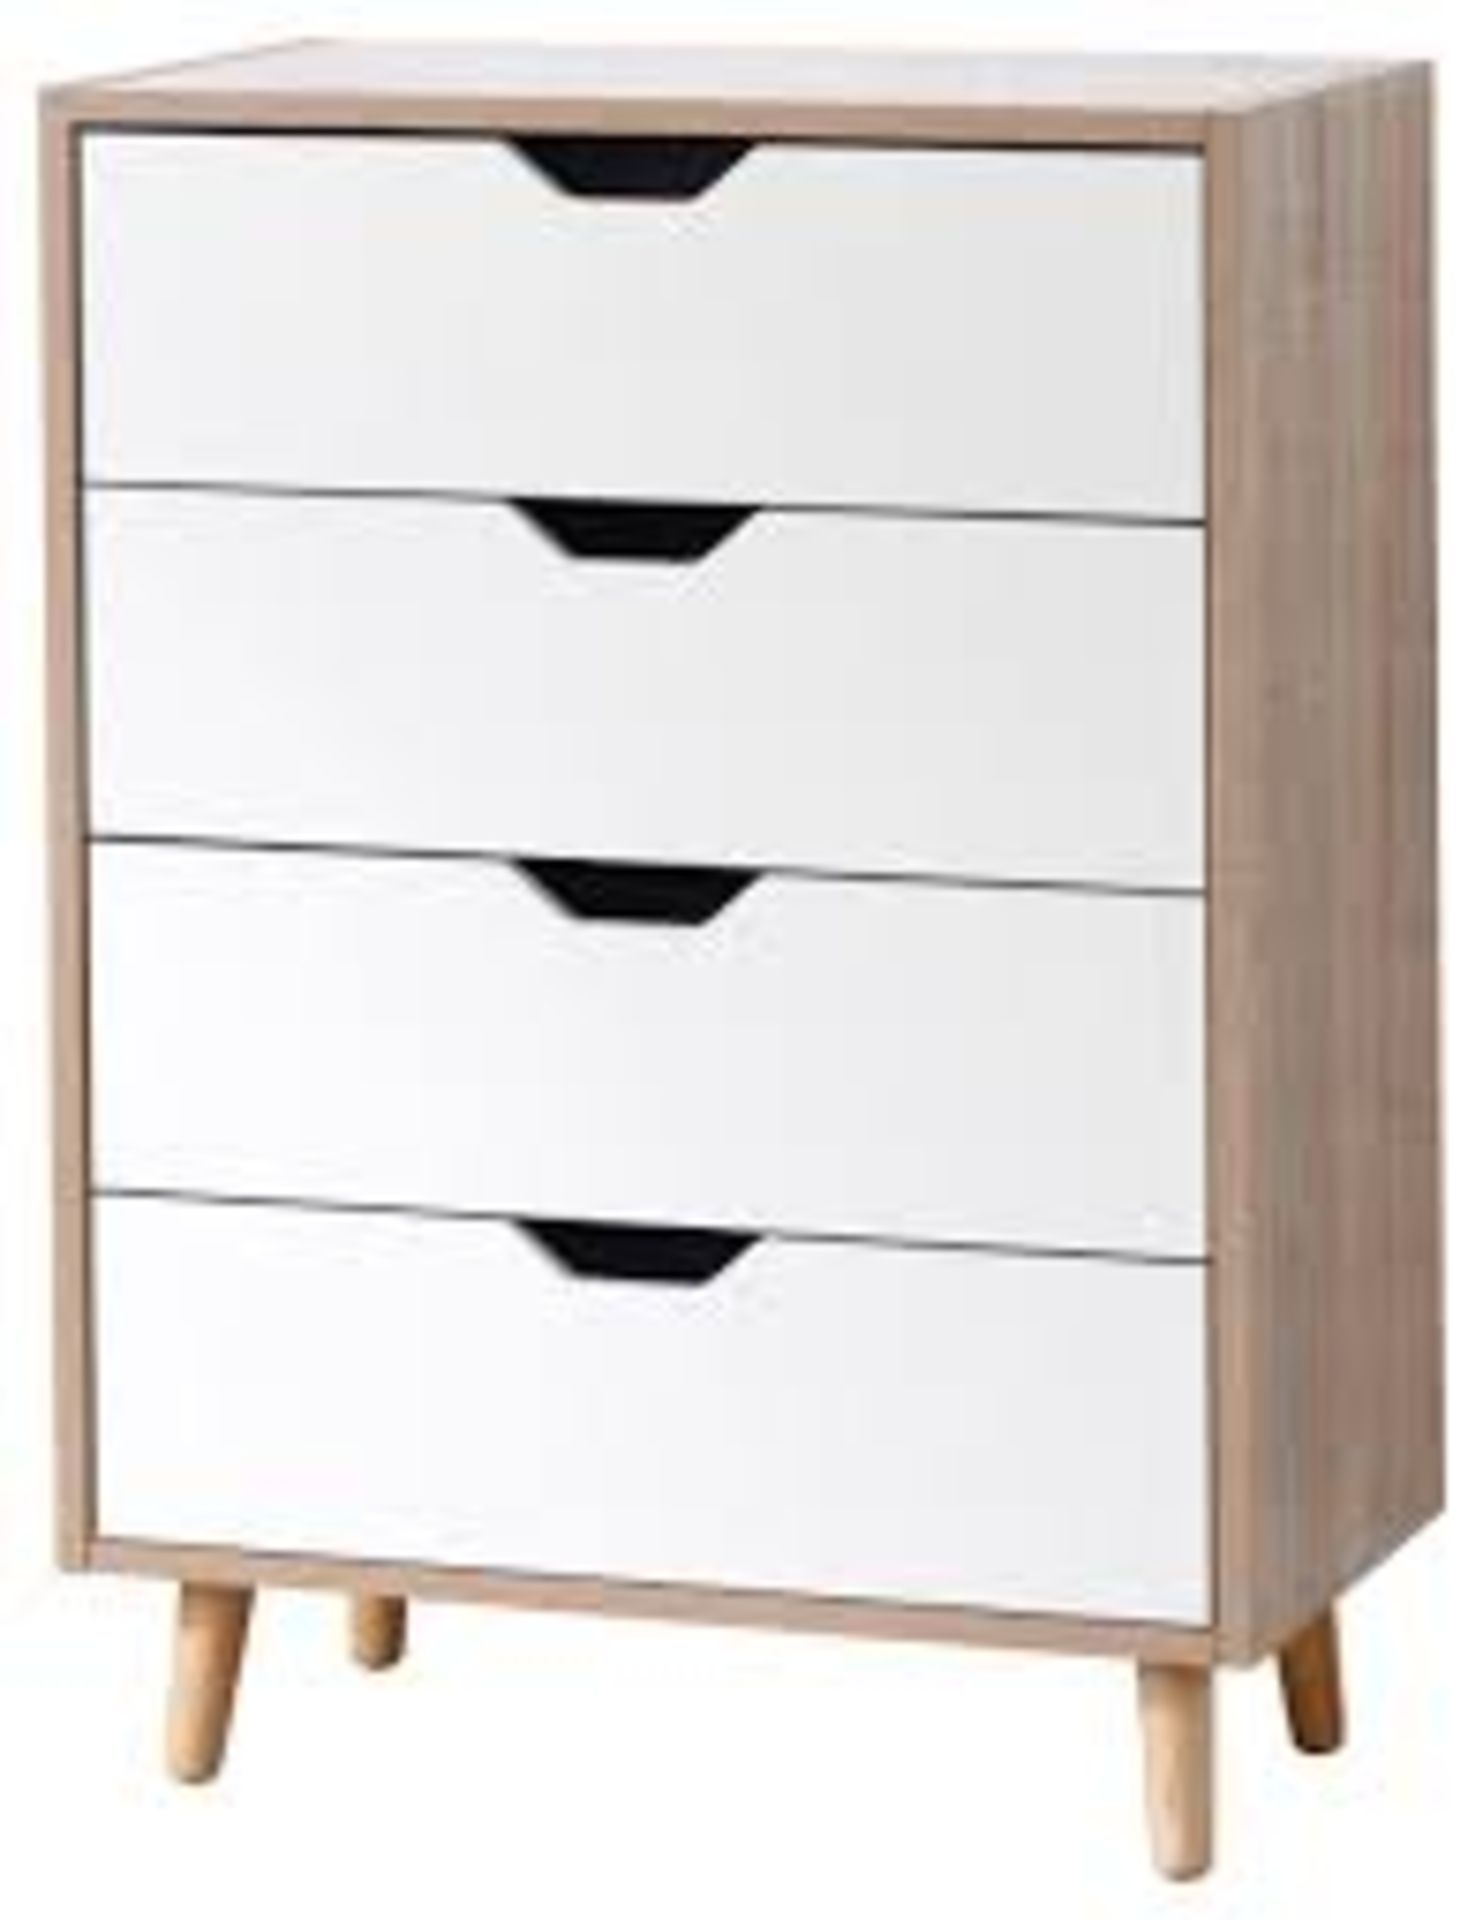 Boxed Stockholm White & Oak 4 Drawer Chest Drawers RRP £130 (18502) Appraisals Available Upon